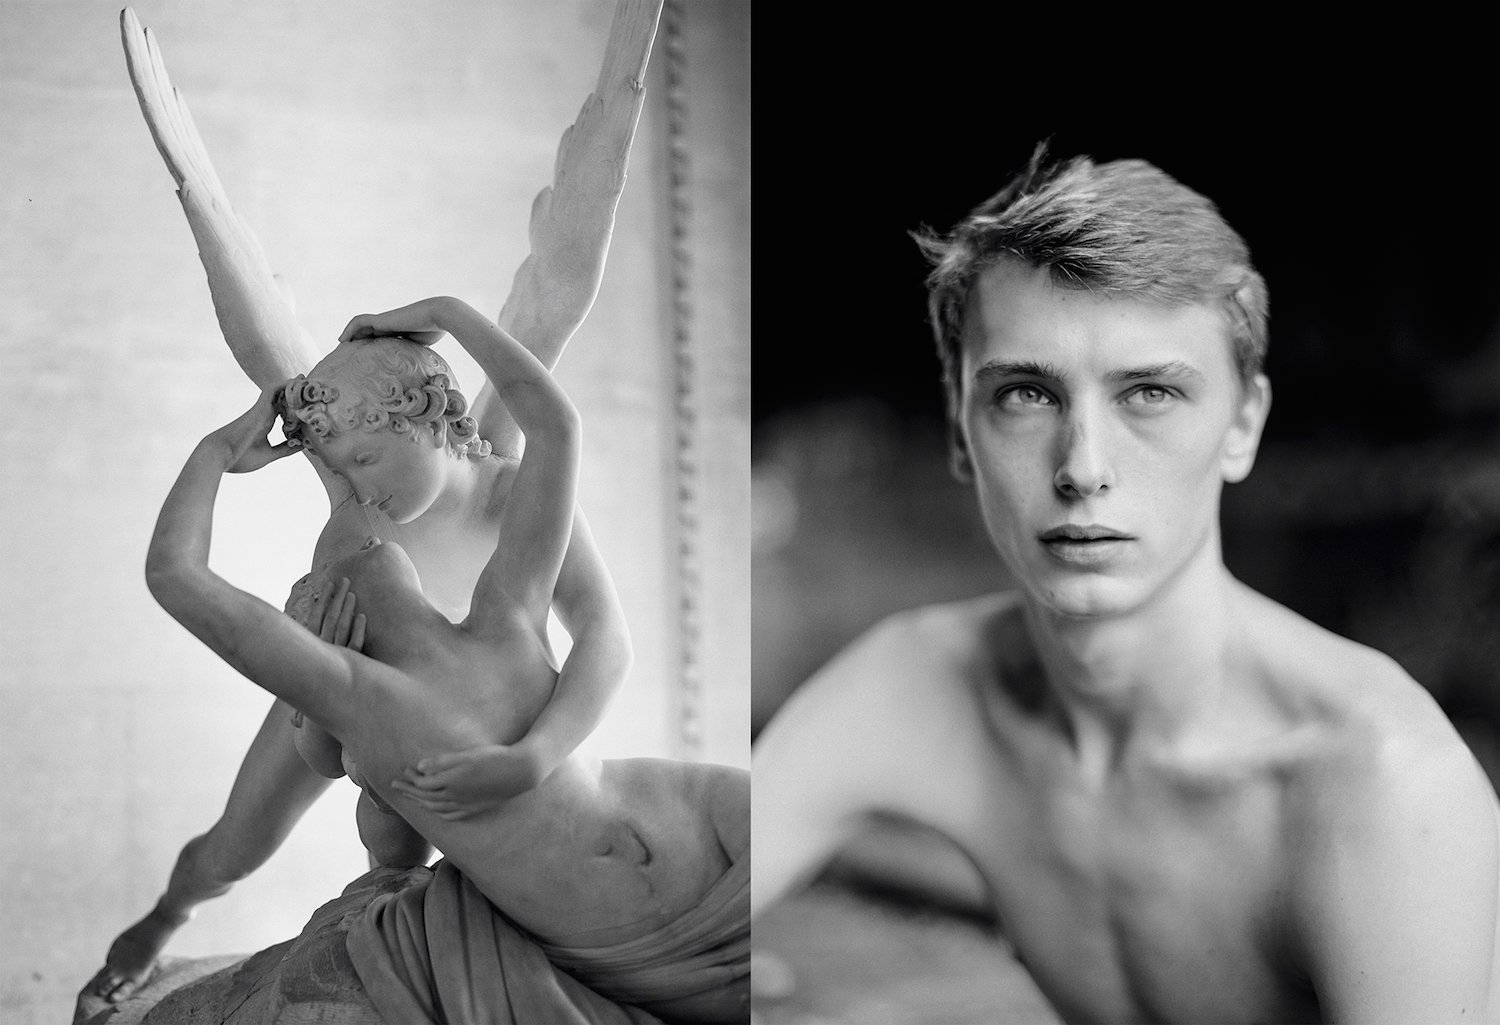 Chiselled beauty: portraits of fatefully fragile youth